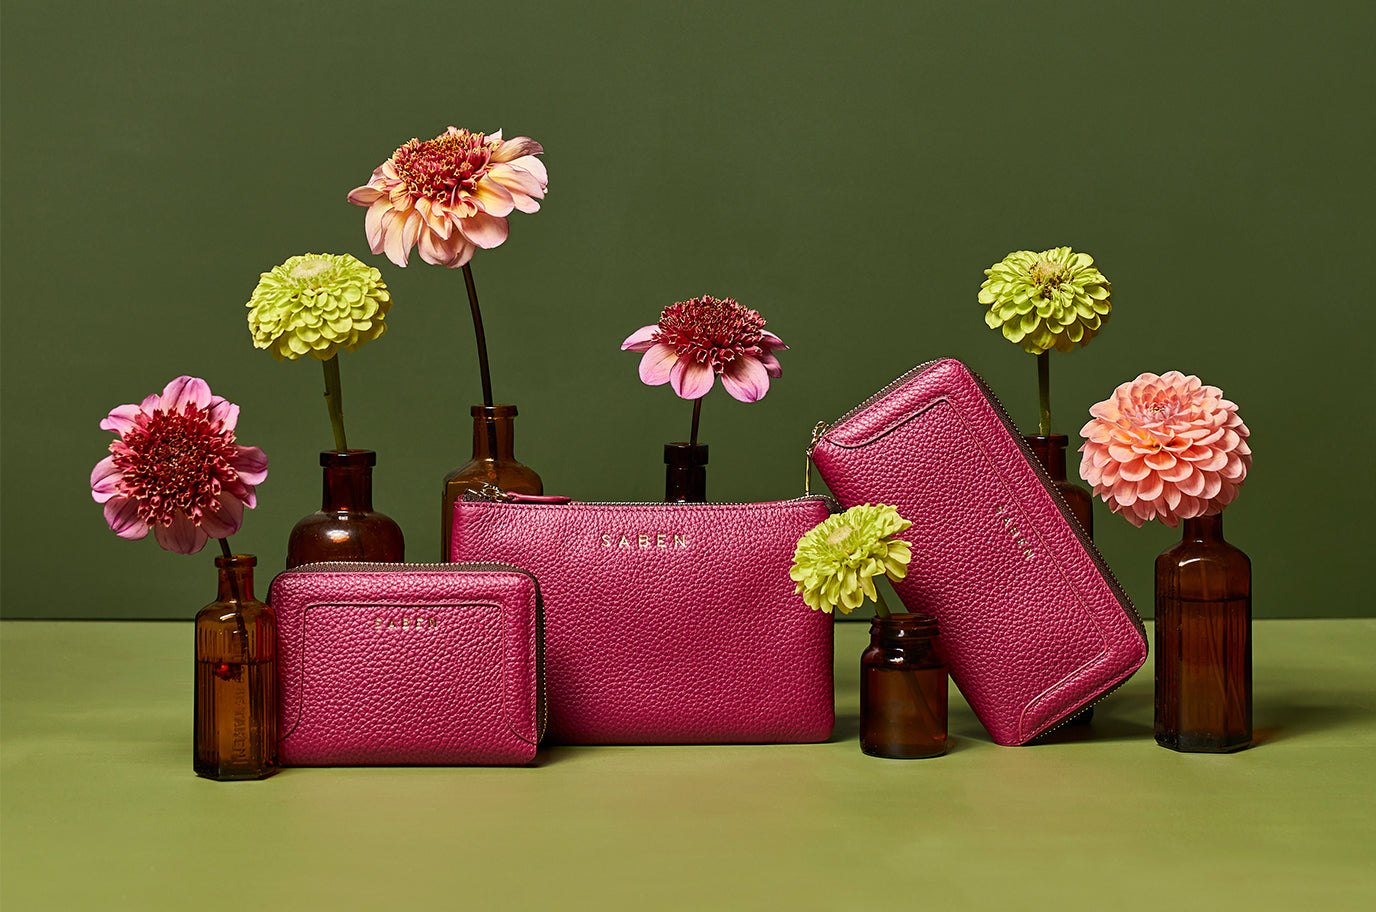 new saben orchid pink leather wallets and handbags sit on green background